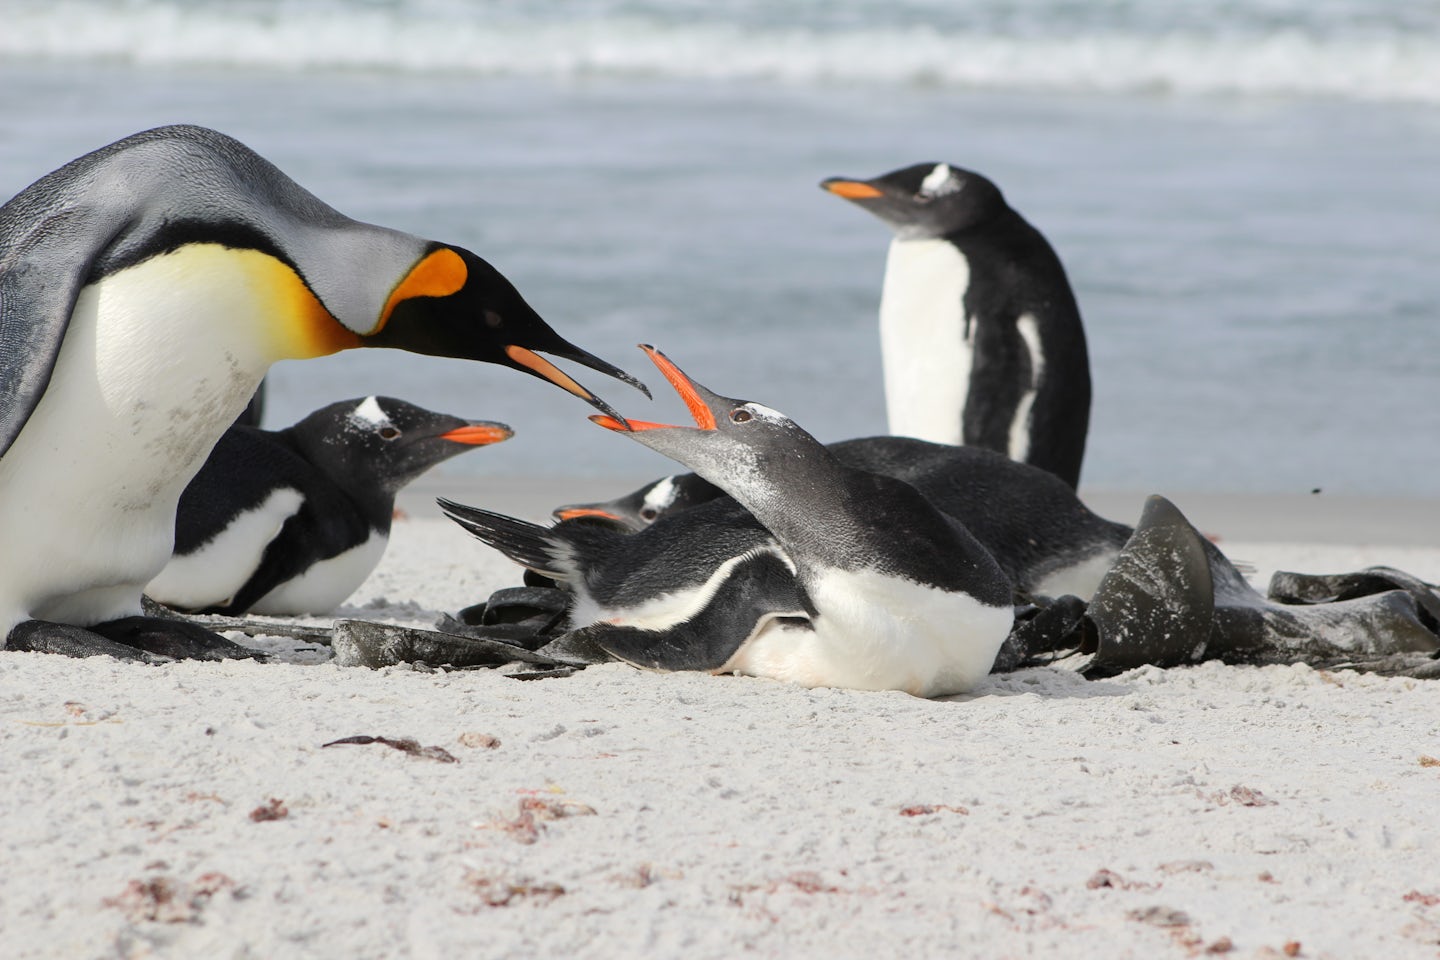 One of the three King penguins exerting dominance at Berthas Beach